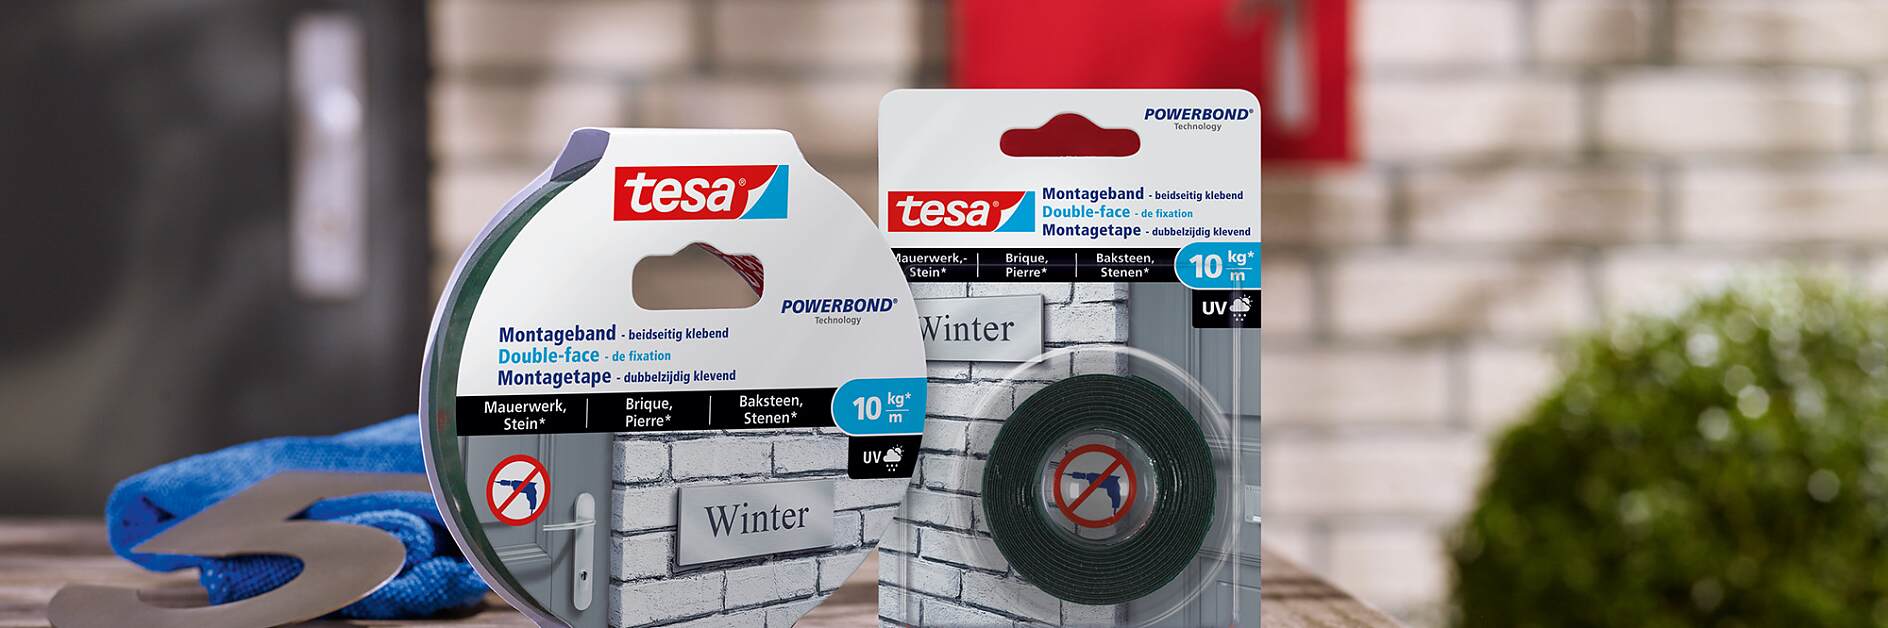 How to use tesa® Mounting Tape for Brick & Stone 10kg/m.